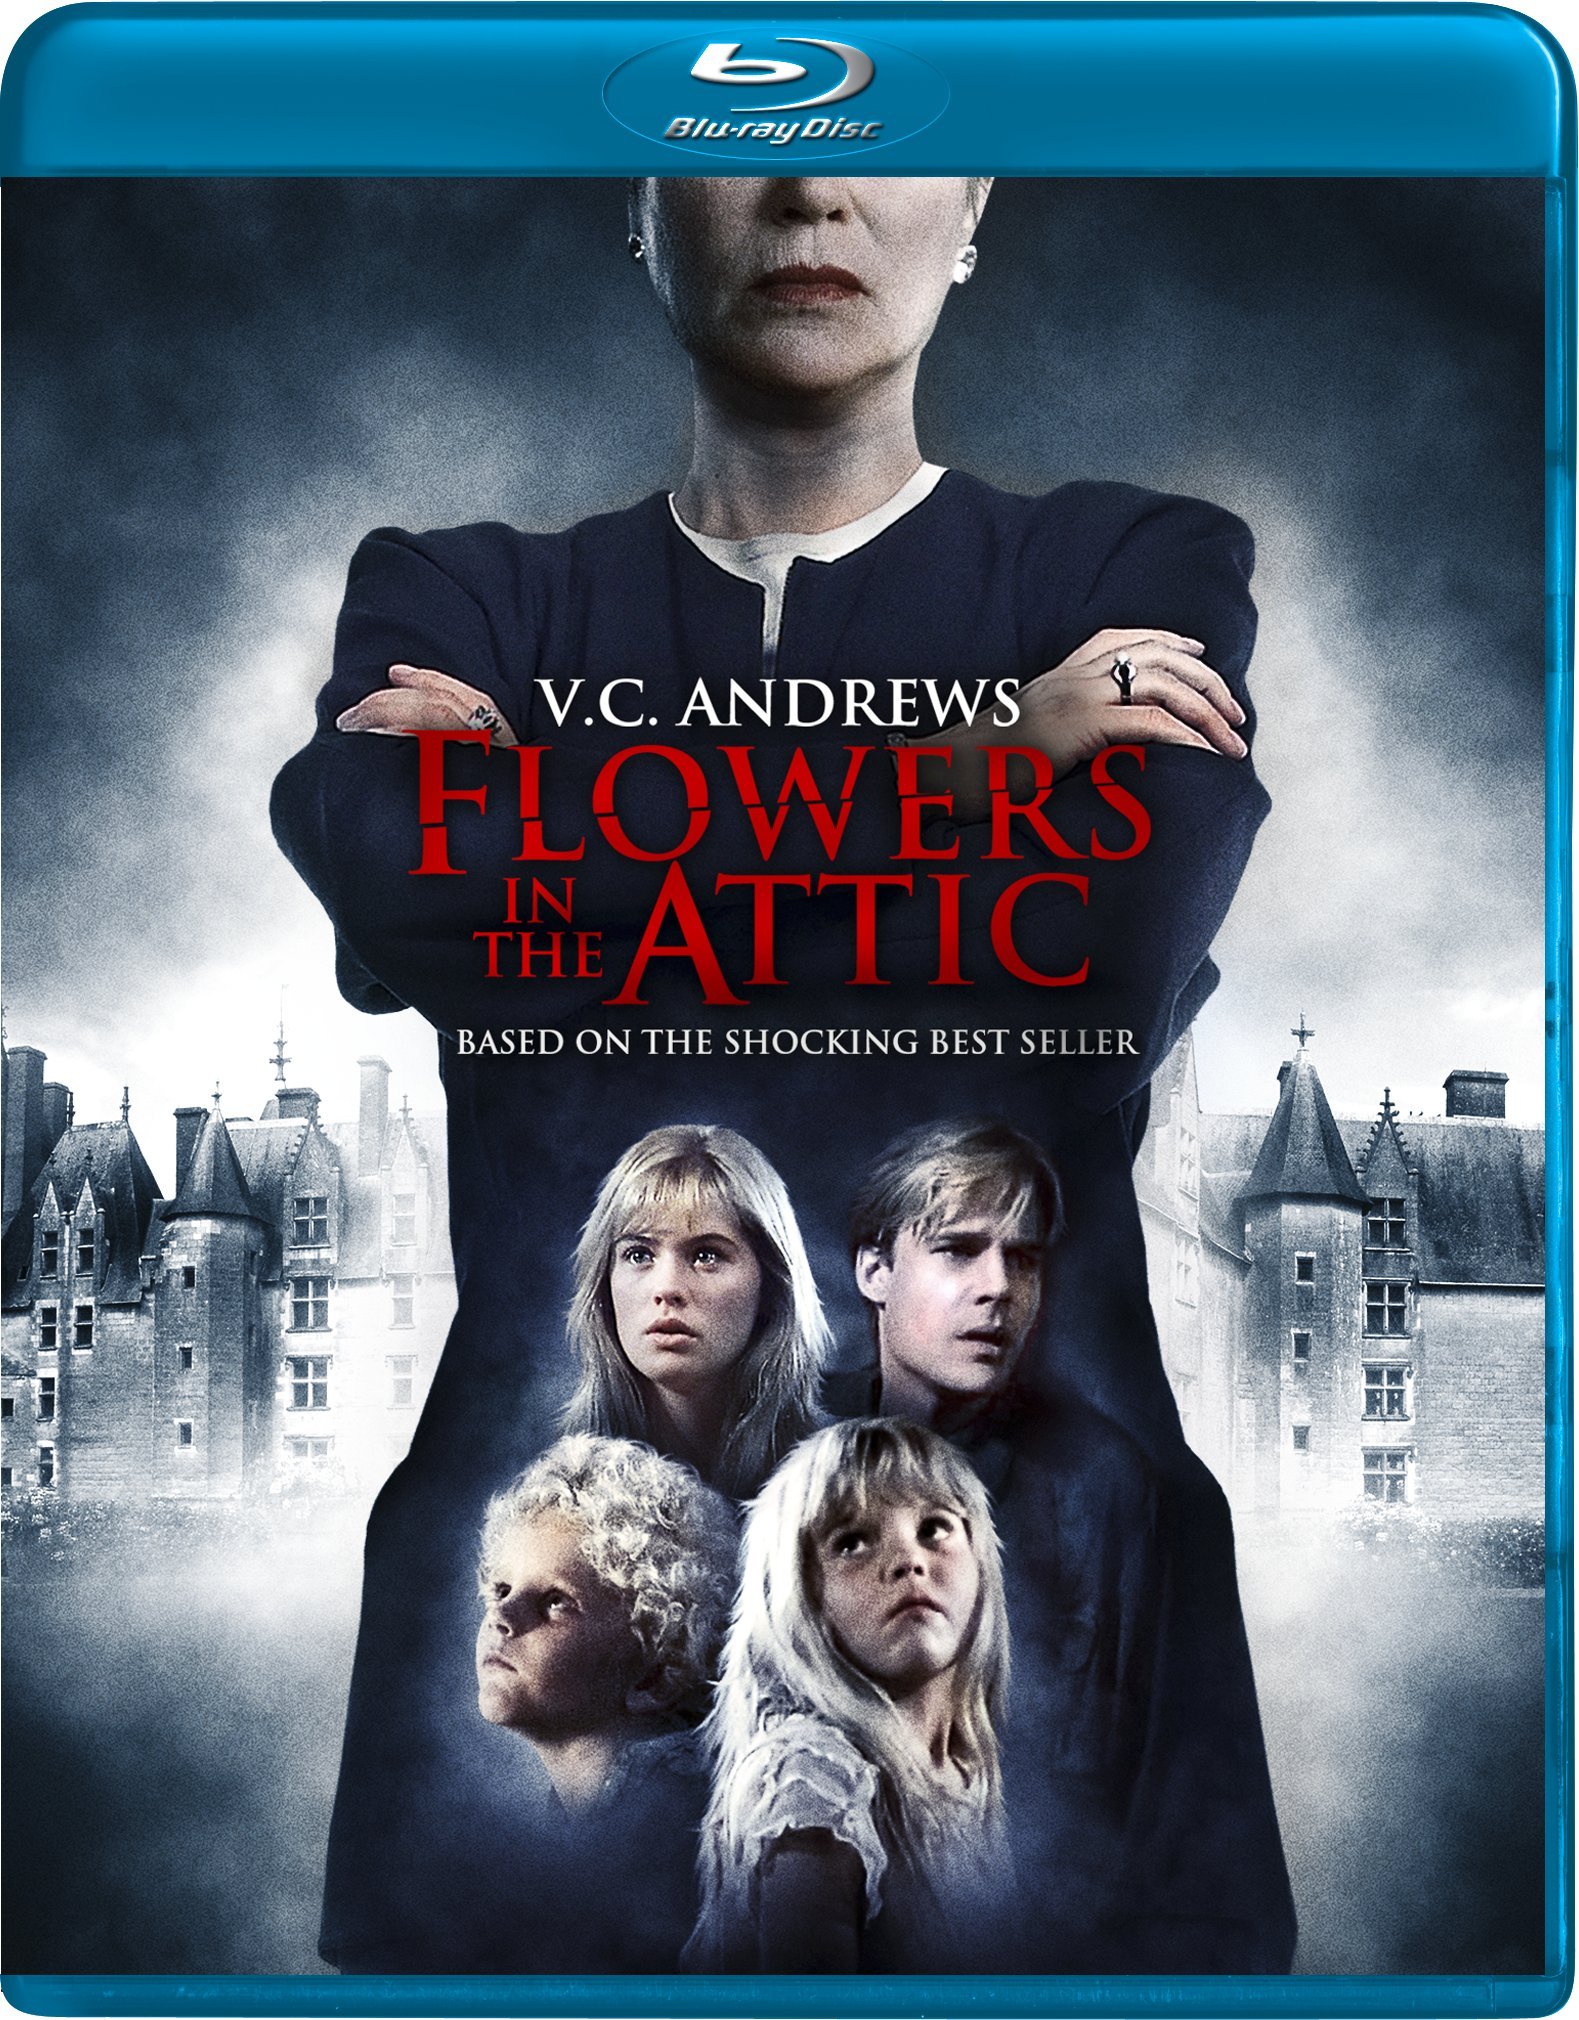 Flowers in the Attic DVD Release Date
